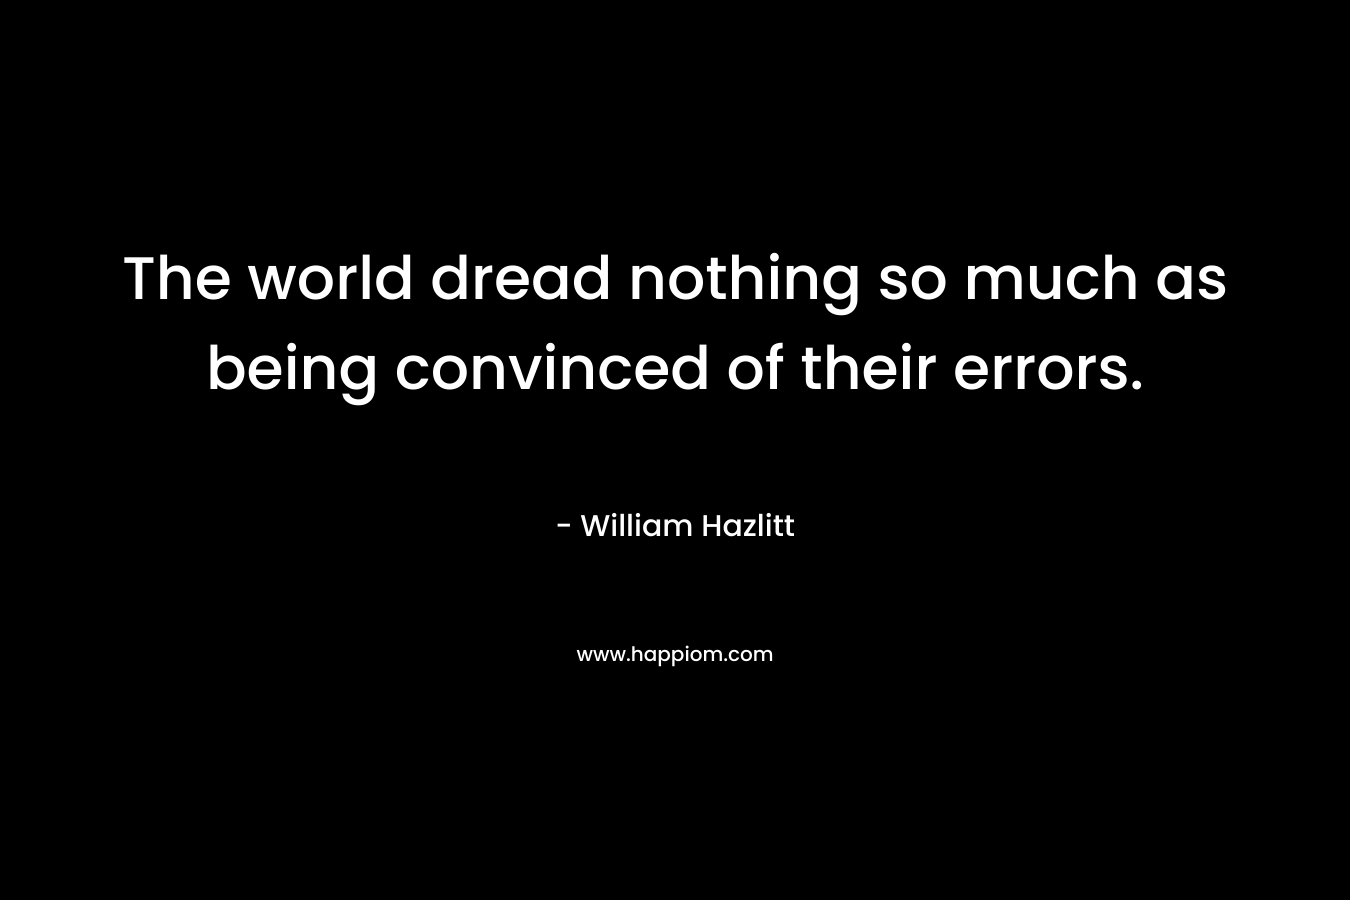 The world dread nothing so much as being convinced of their errors.